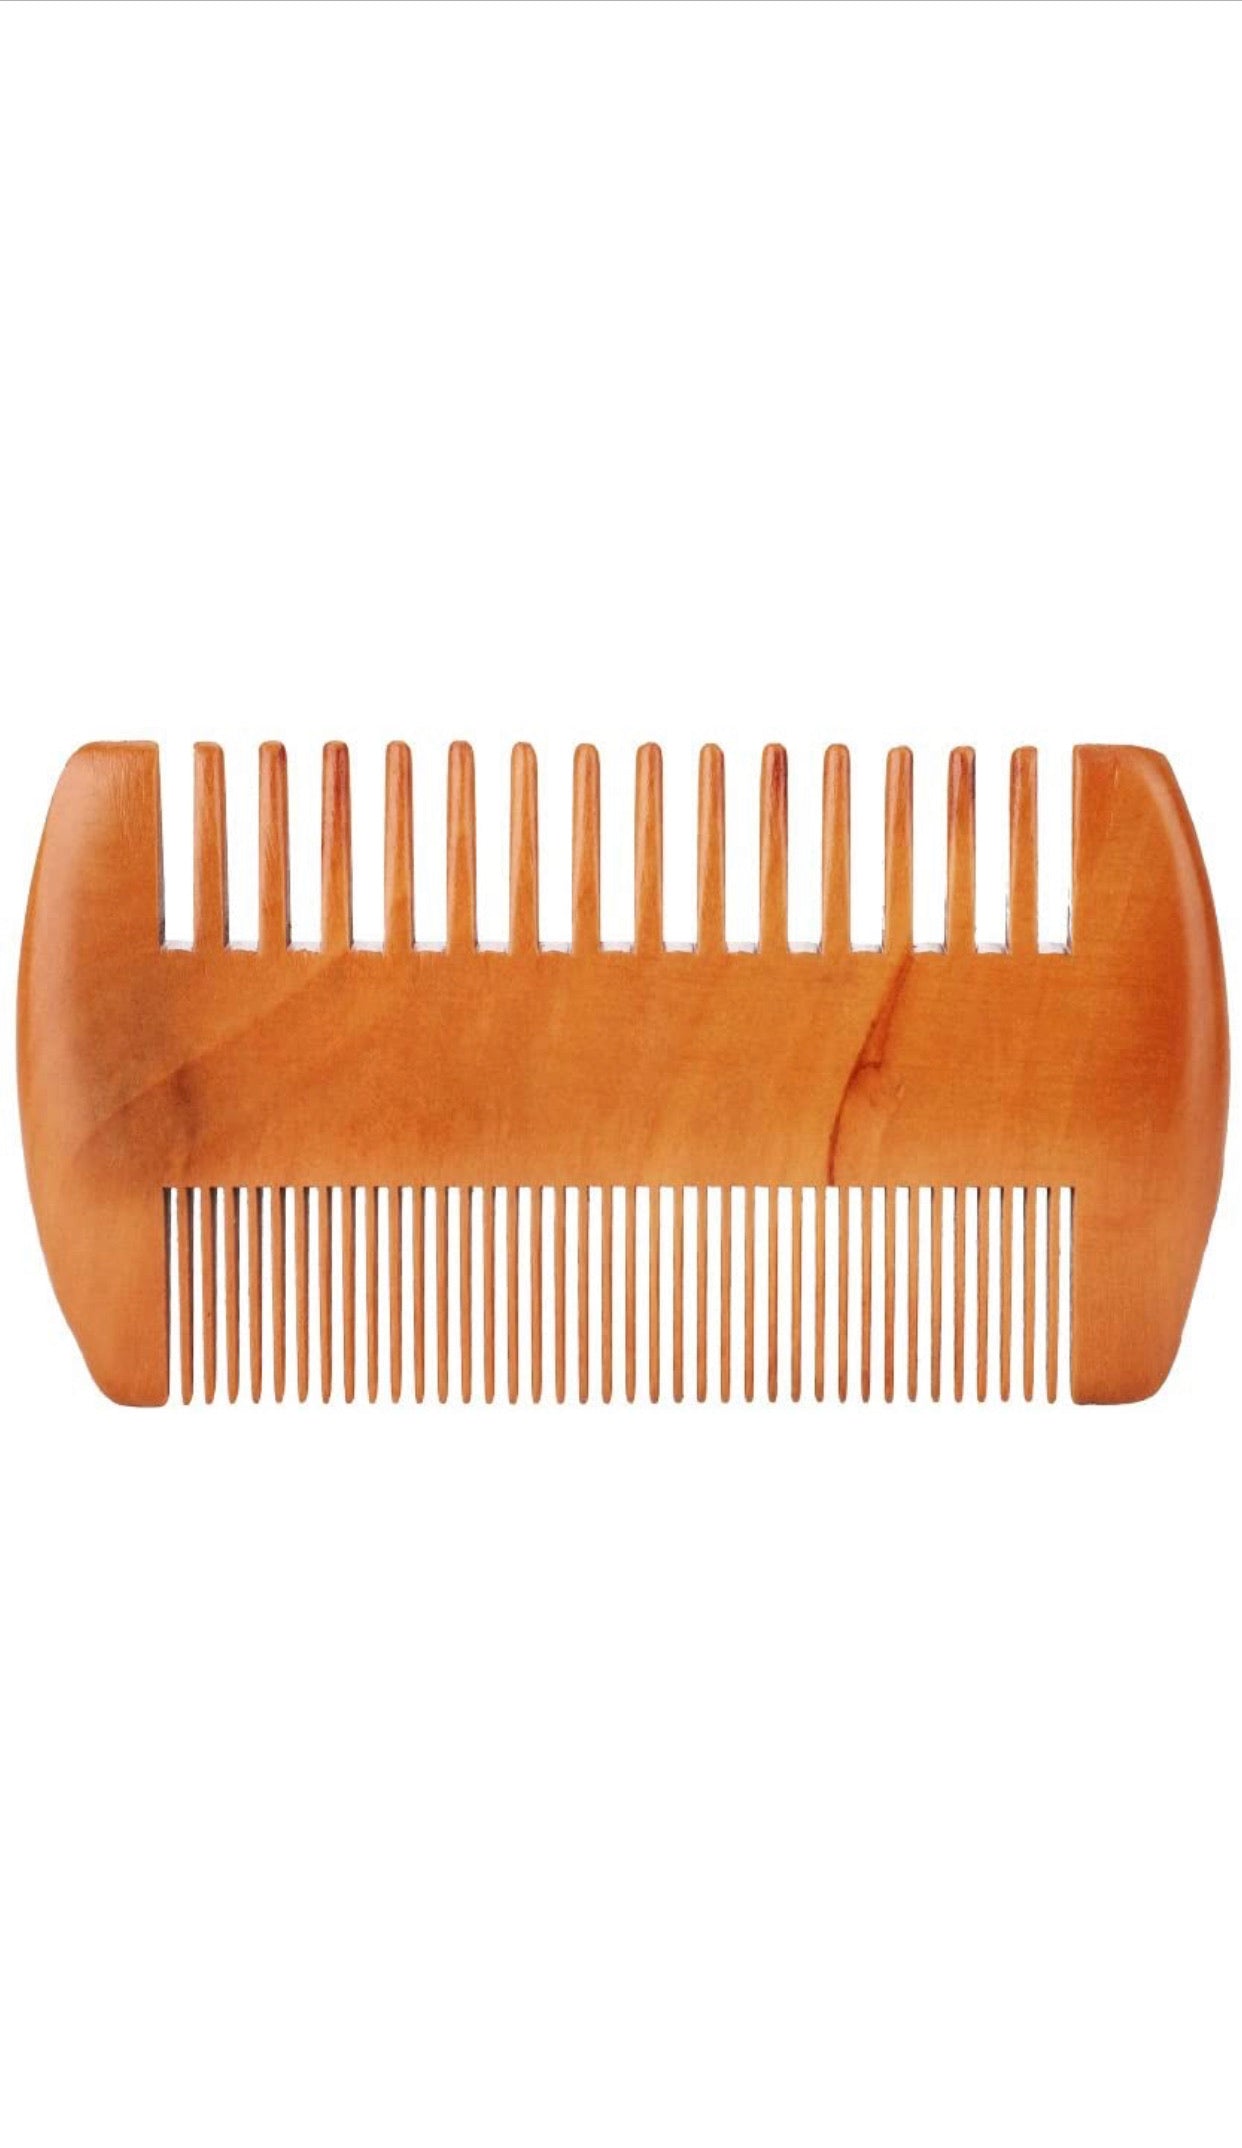  Natural wooden comb, handmade and double sided. 